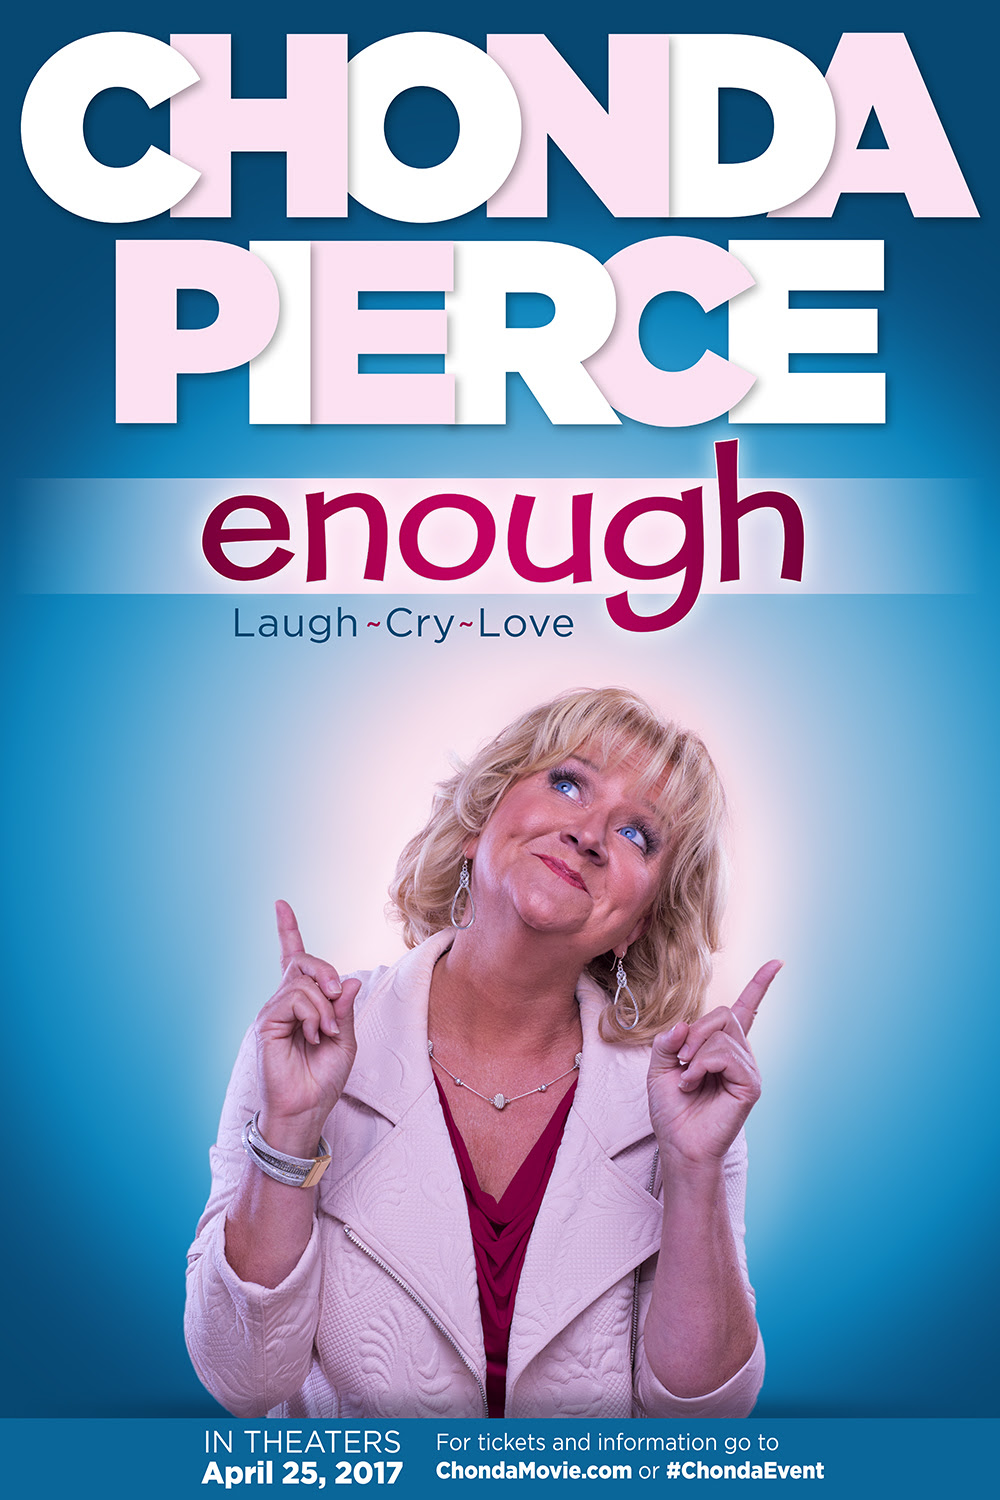 Chonda Pierce returns to theaters for ‘Enough’ in one night event on